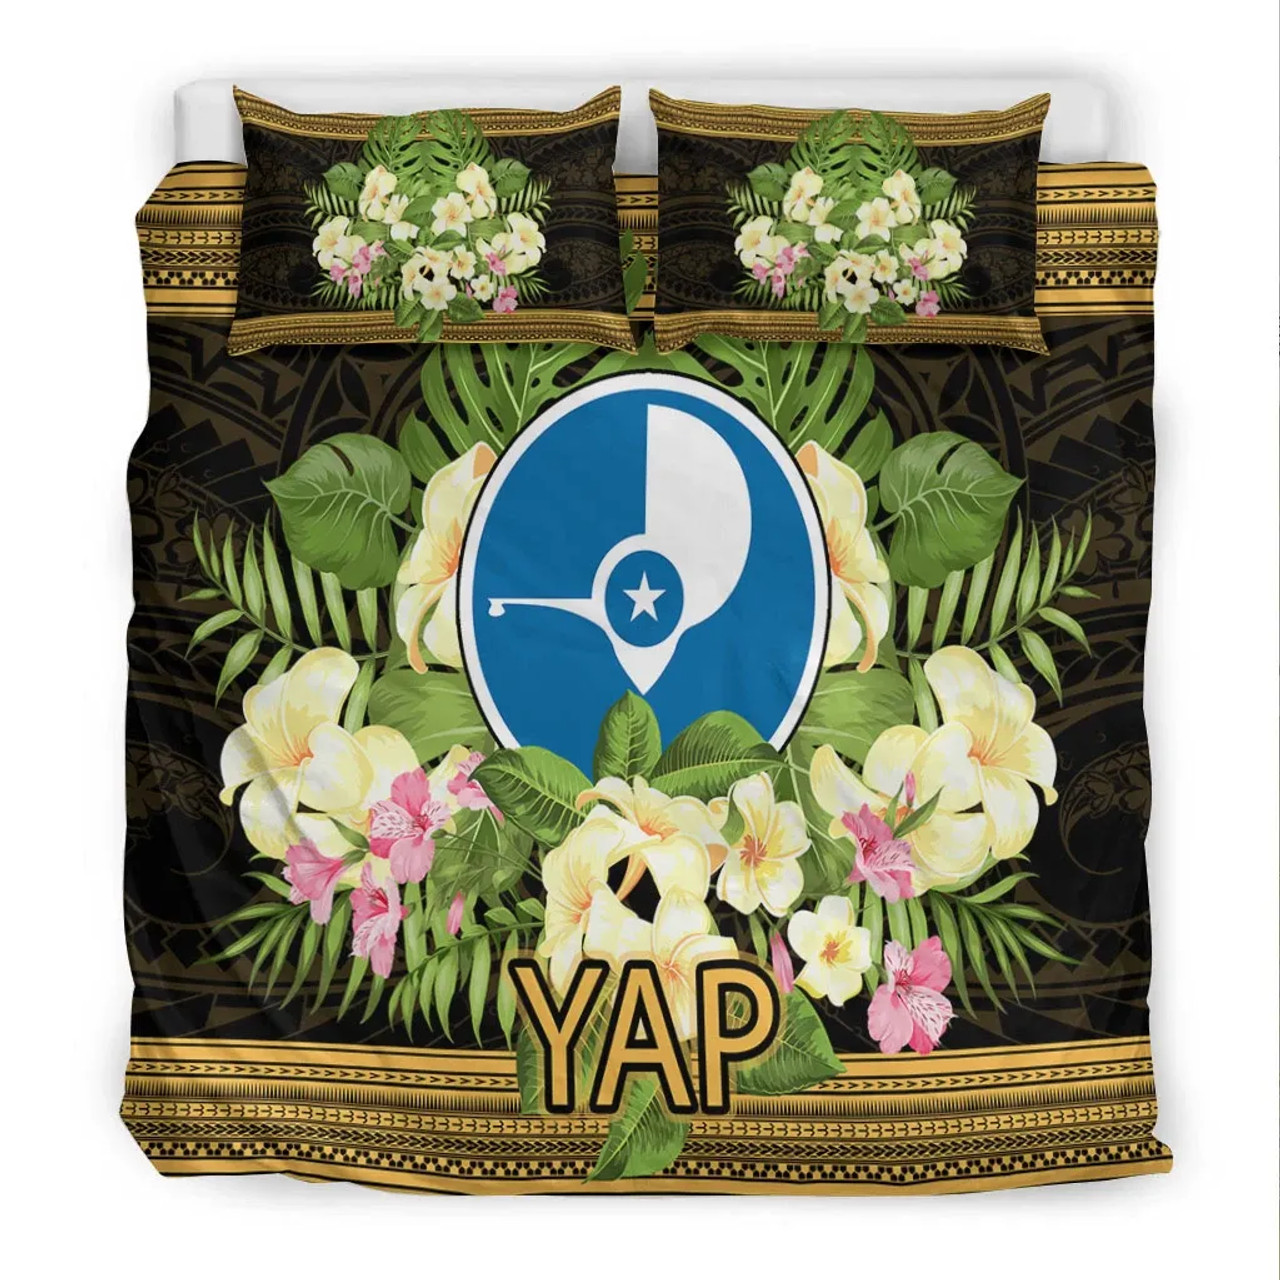 Yap State Bedding Set - Polynesian Gold Patterns Collection 3